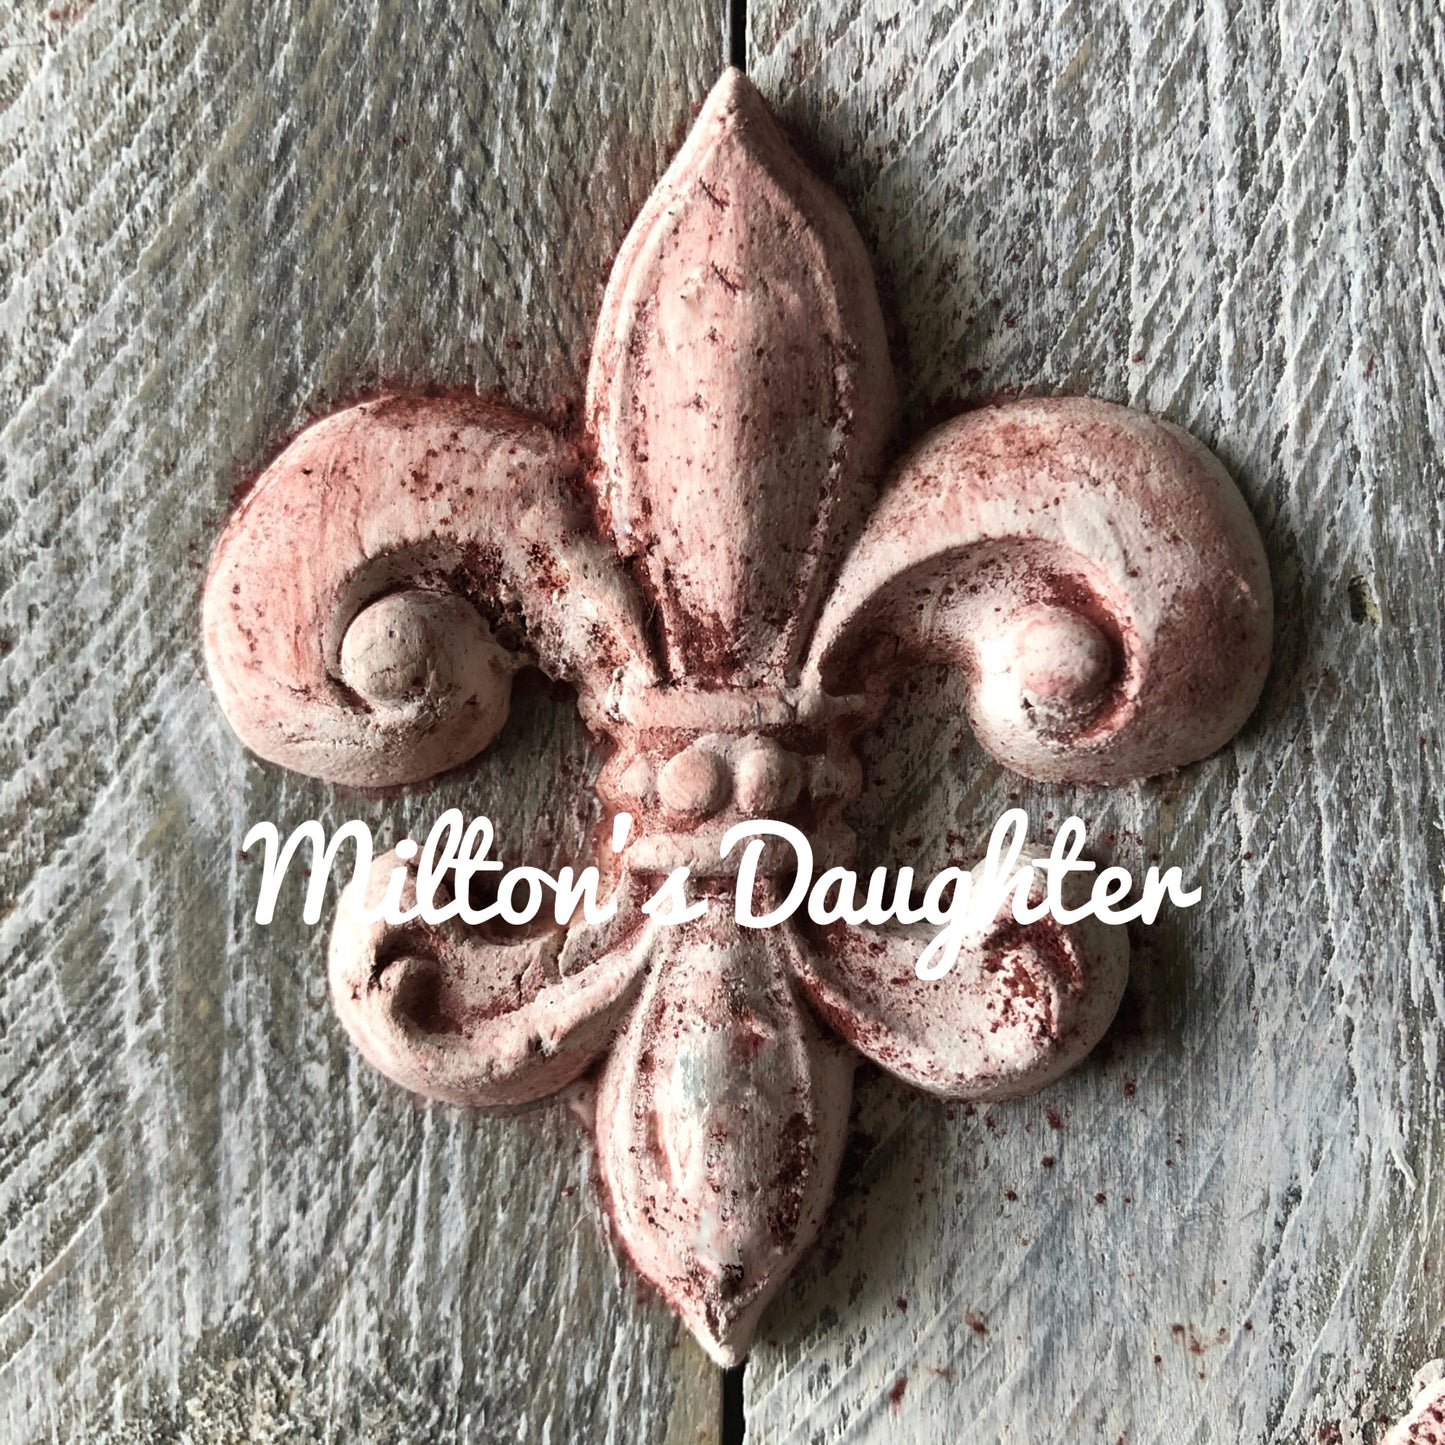 IOD Fleur De Lis Mold casting mounted on wood at Milton's Daughter